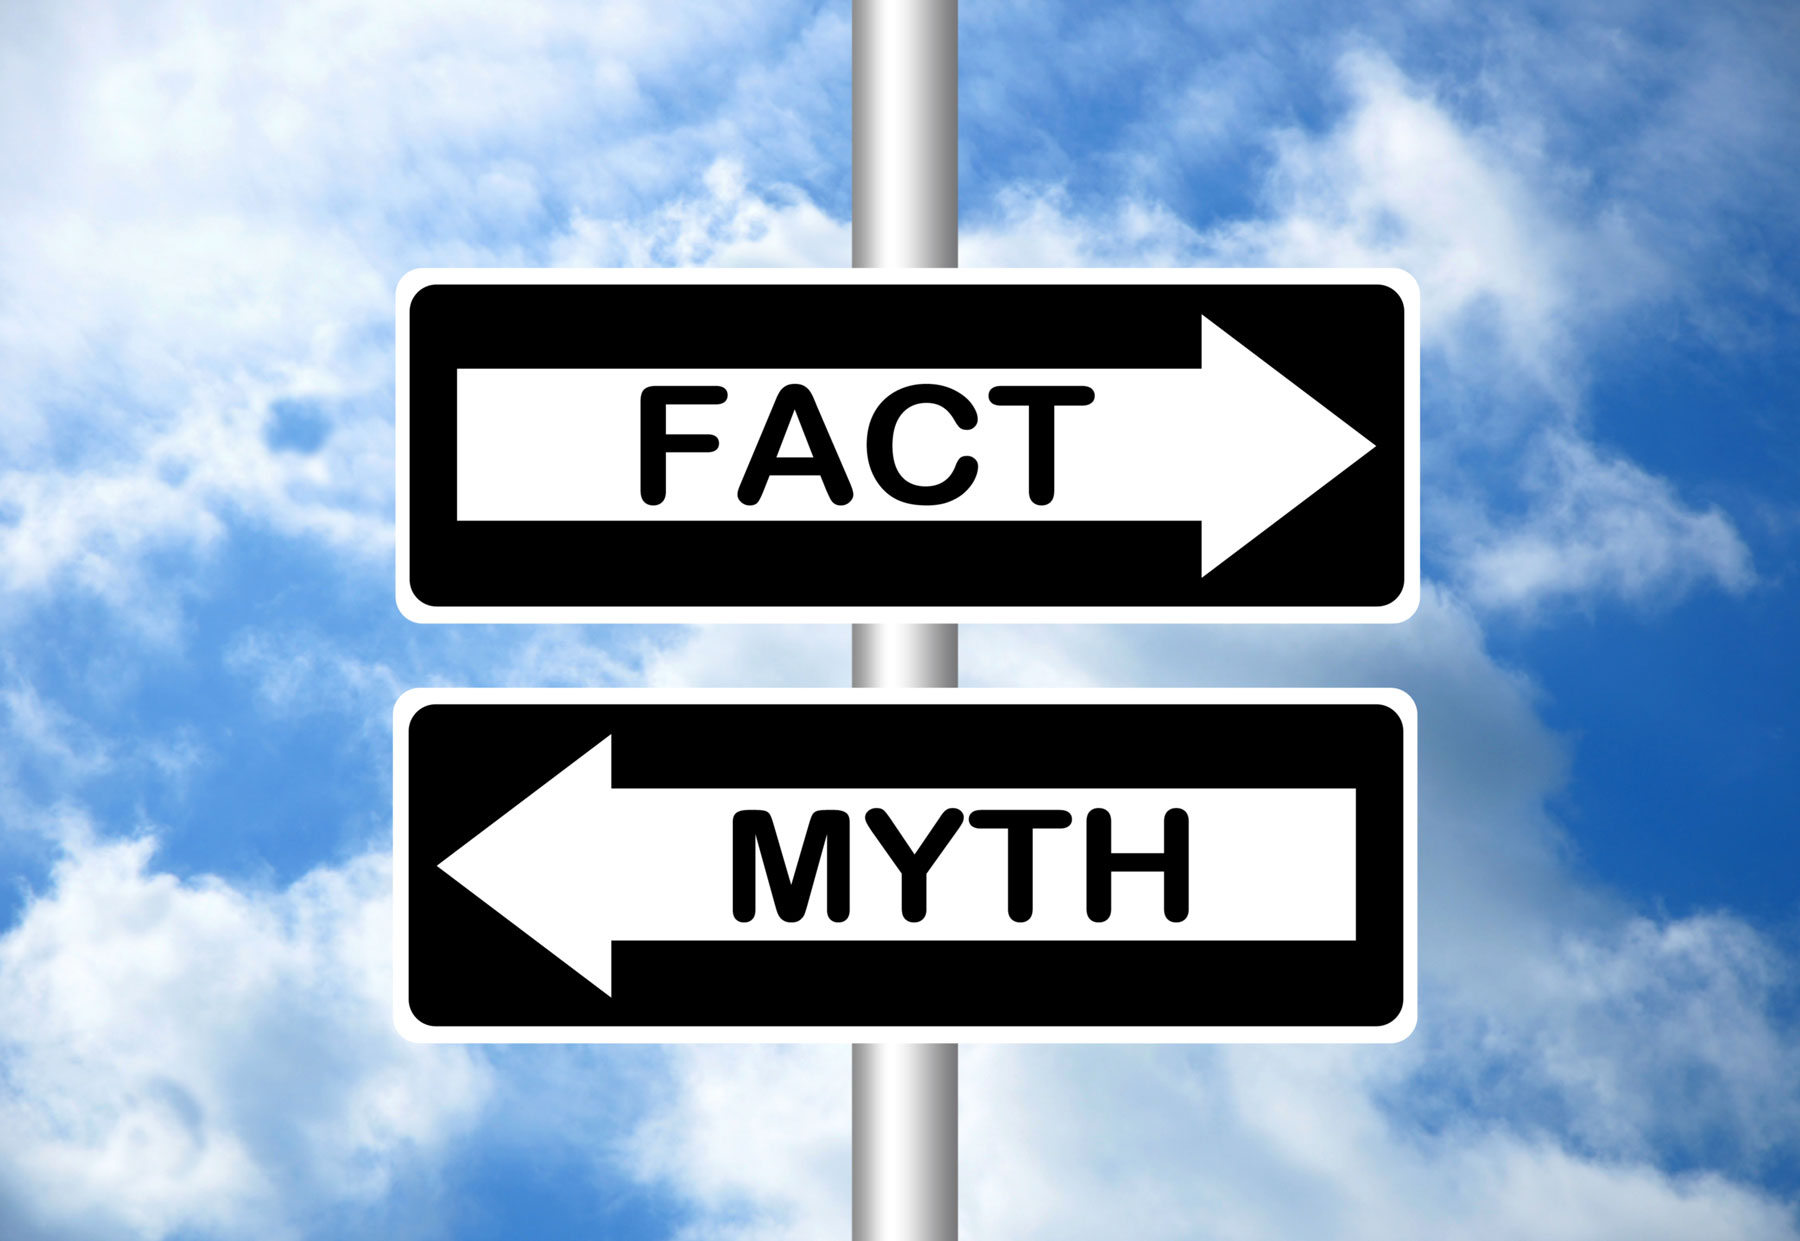 Financial Myths versus Facts: 7 Myths Busted